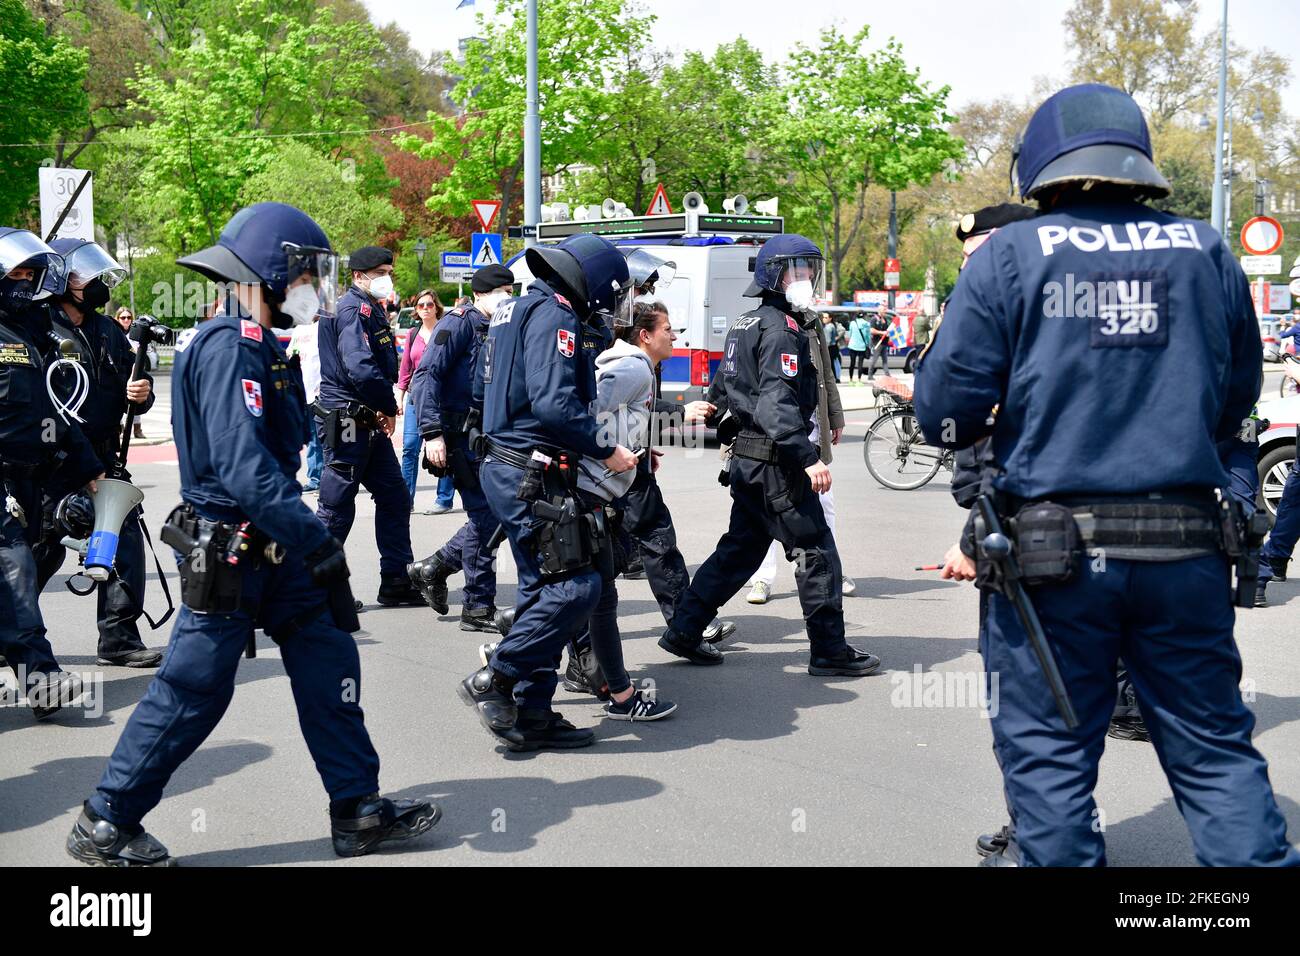 Vienna, Austria. 1st May 2021. Big demonstration day on May 1st in Vienna. The police are also expecting several unregistered demonstrations and will cordon off several streets in downtown Vienna for safety.   Credit: Franz Perc / Alamy Live News Stock Photo